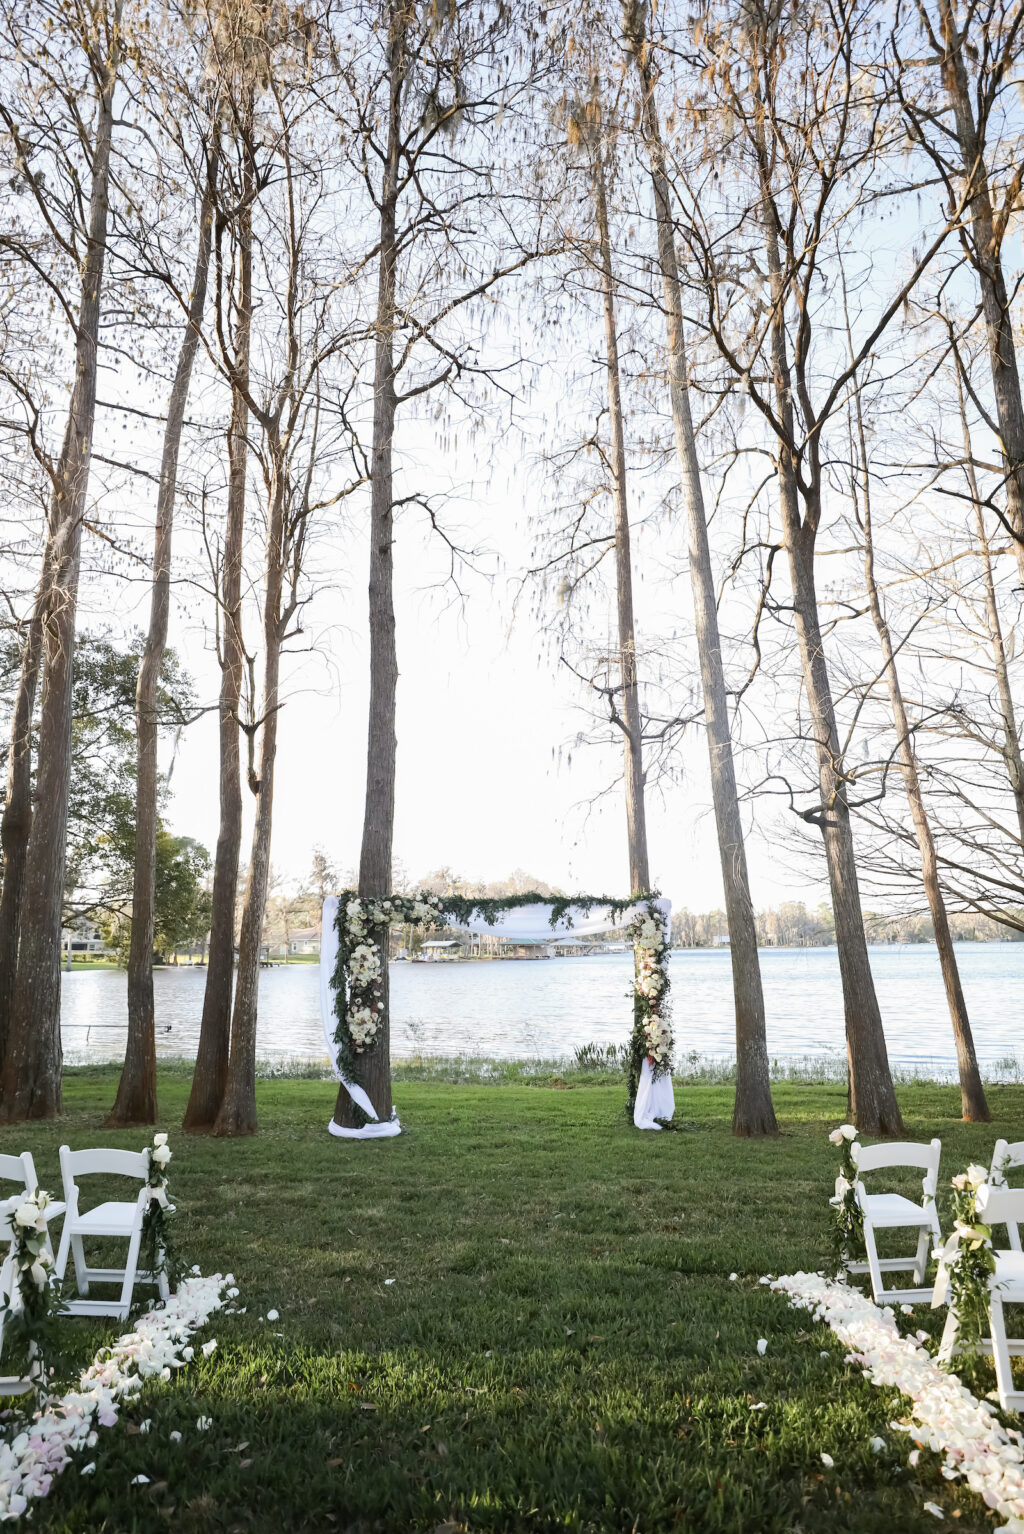 Romantic Outdoor Wedding Ceremony Decor, Wooden Arch with White Linen Draping and Floral Arrangements | Tampa Bay Wedding Photographer Lifelong Photography Studio | Wedding Planner Special Moments Event Planning